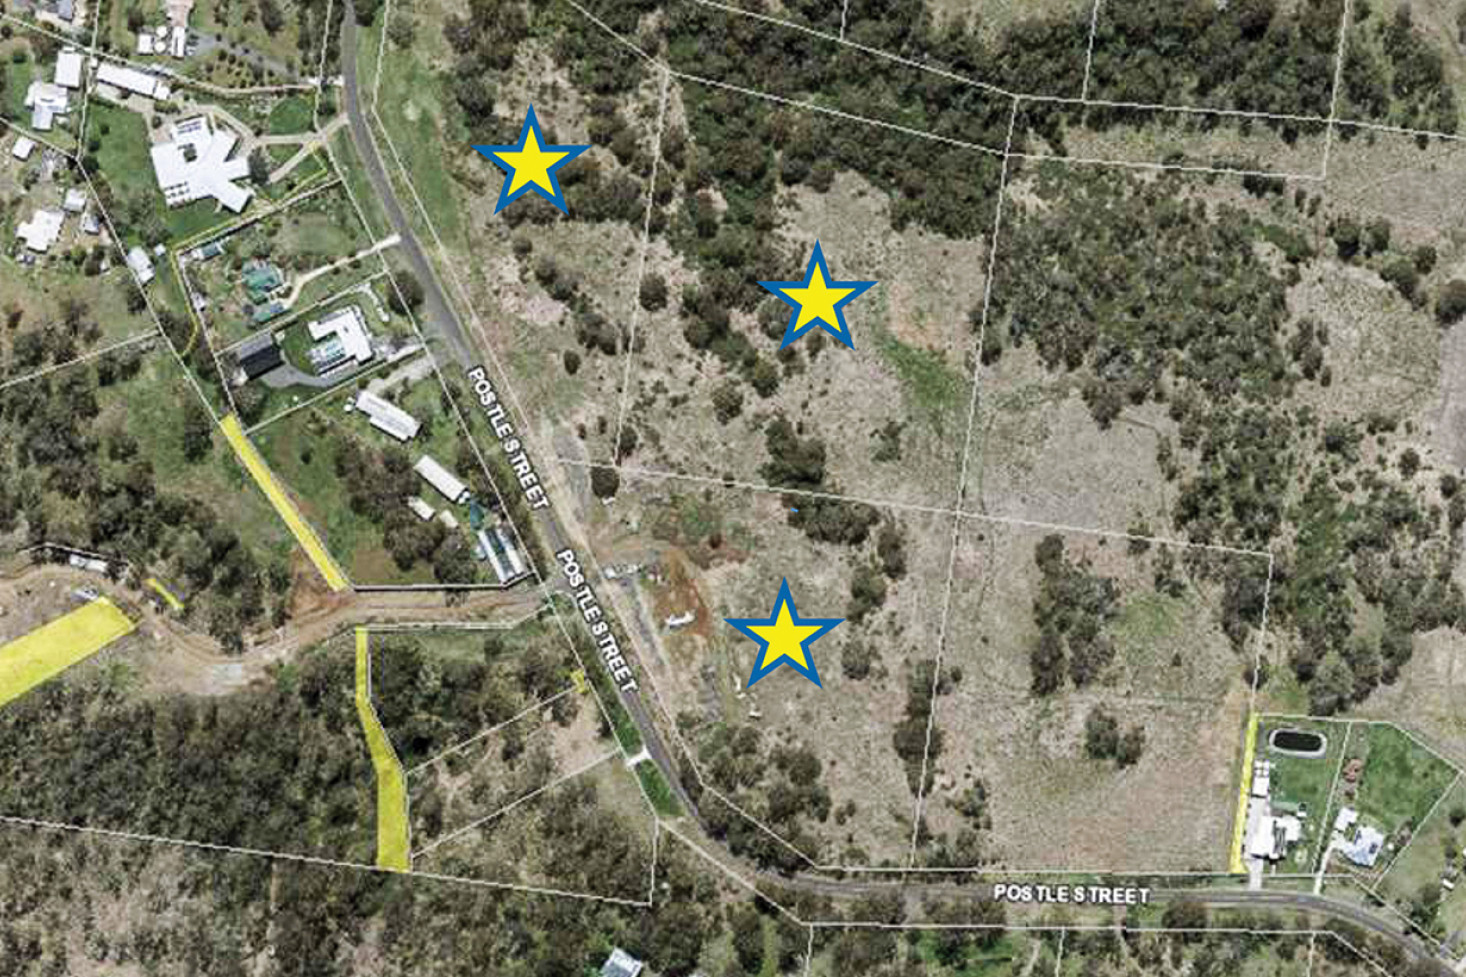 The three lots comprising the proposed subdivision are represented by stars. As can be seen, existing rural residential properties exist to the west and east.